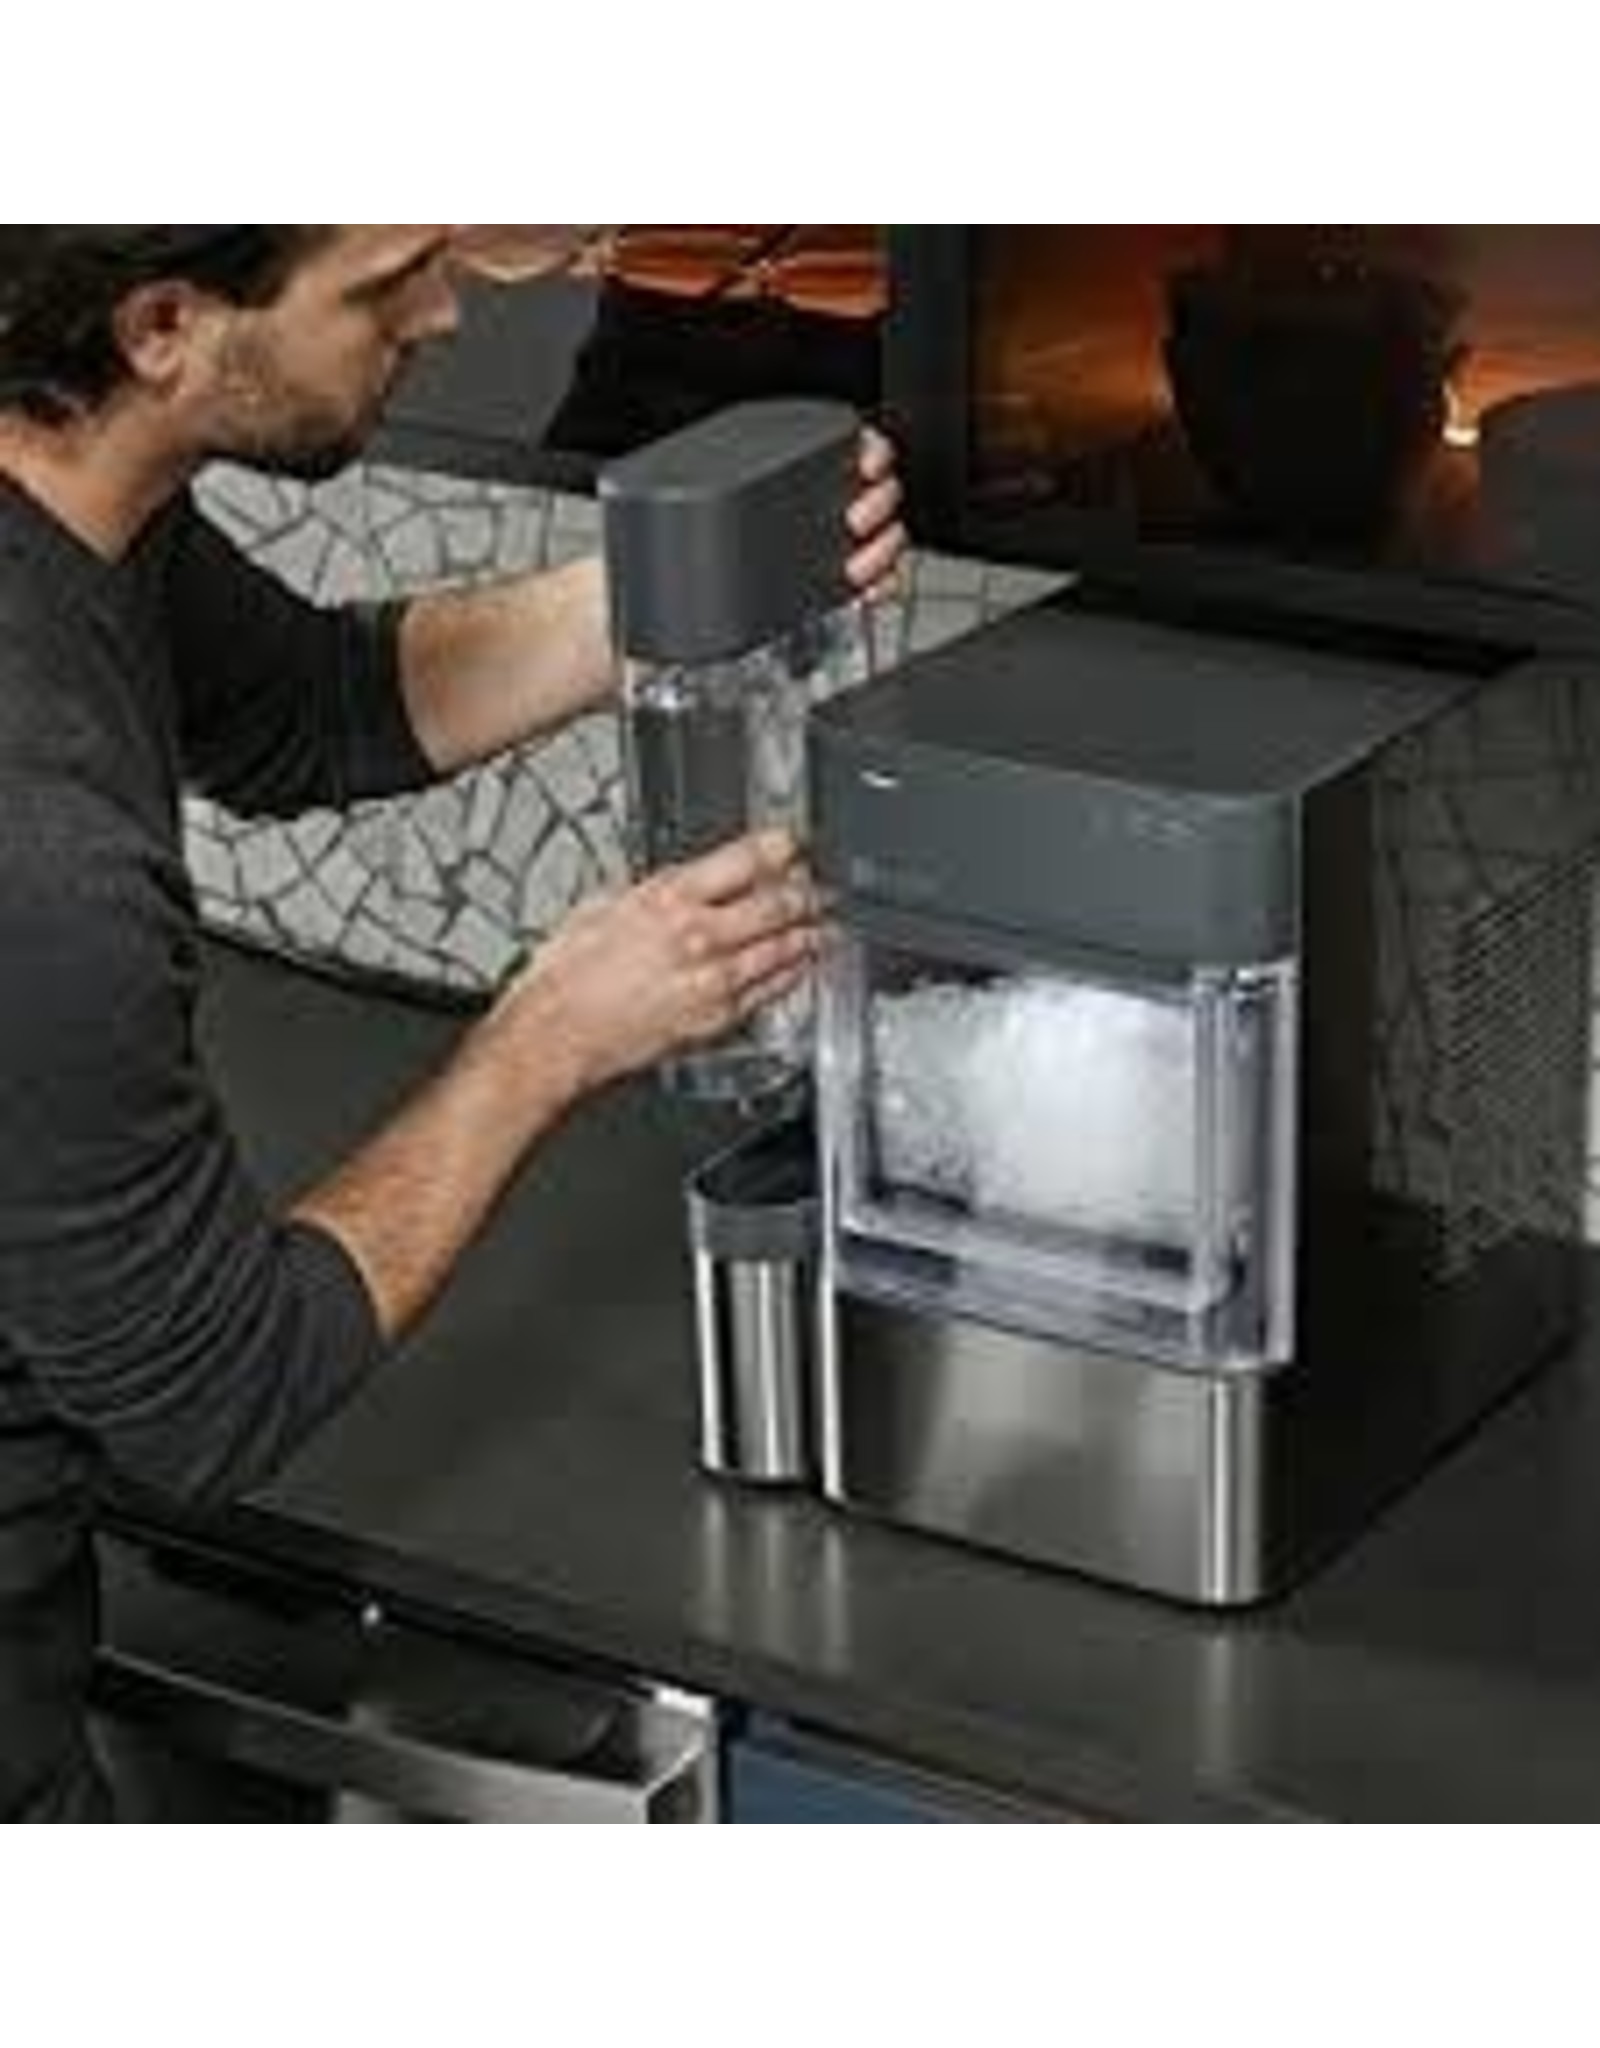 GE PROFILE GE Profile - Portable Ice maker with Nugget Ice Production